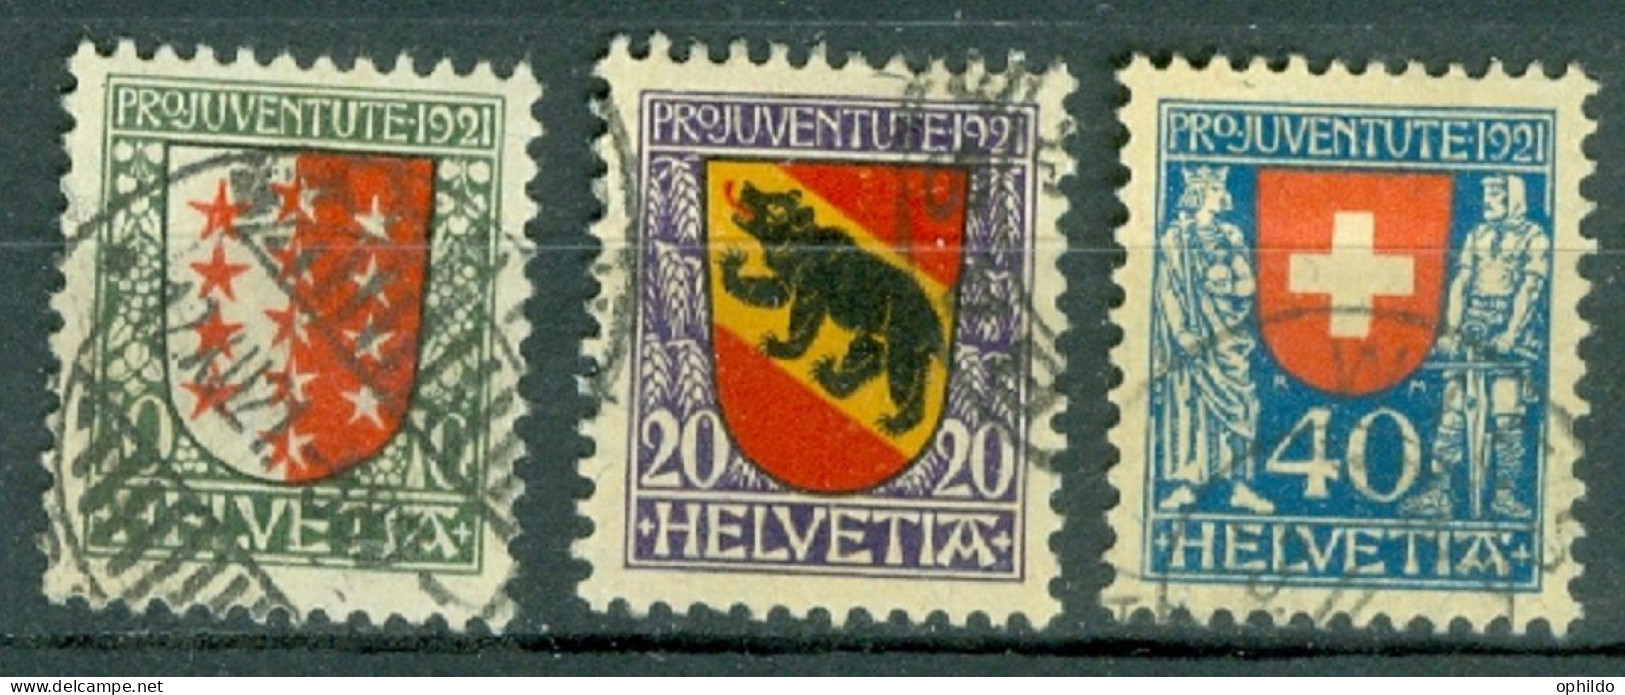 Suisse  Yvert  185/187  Ou Zum  J 18/20  Ob TB  - Used Stamps